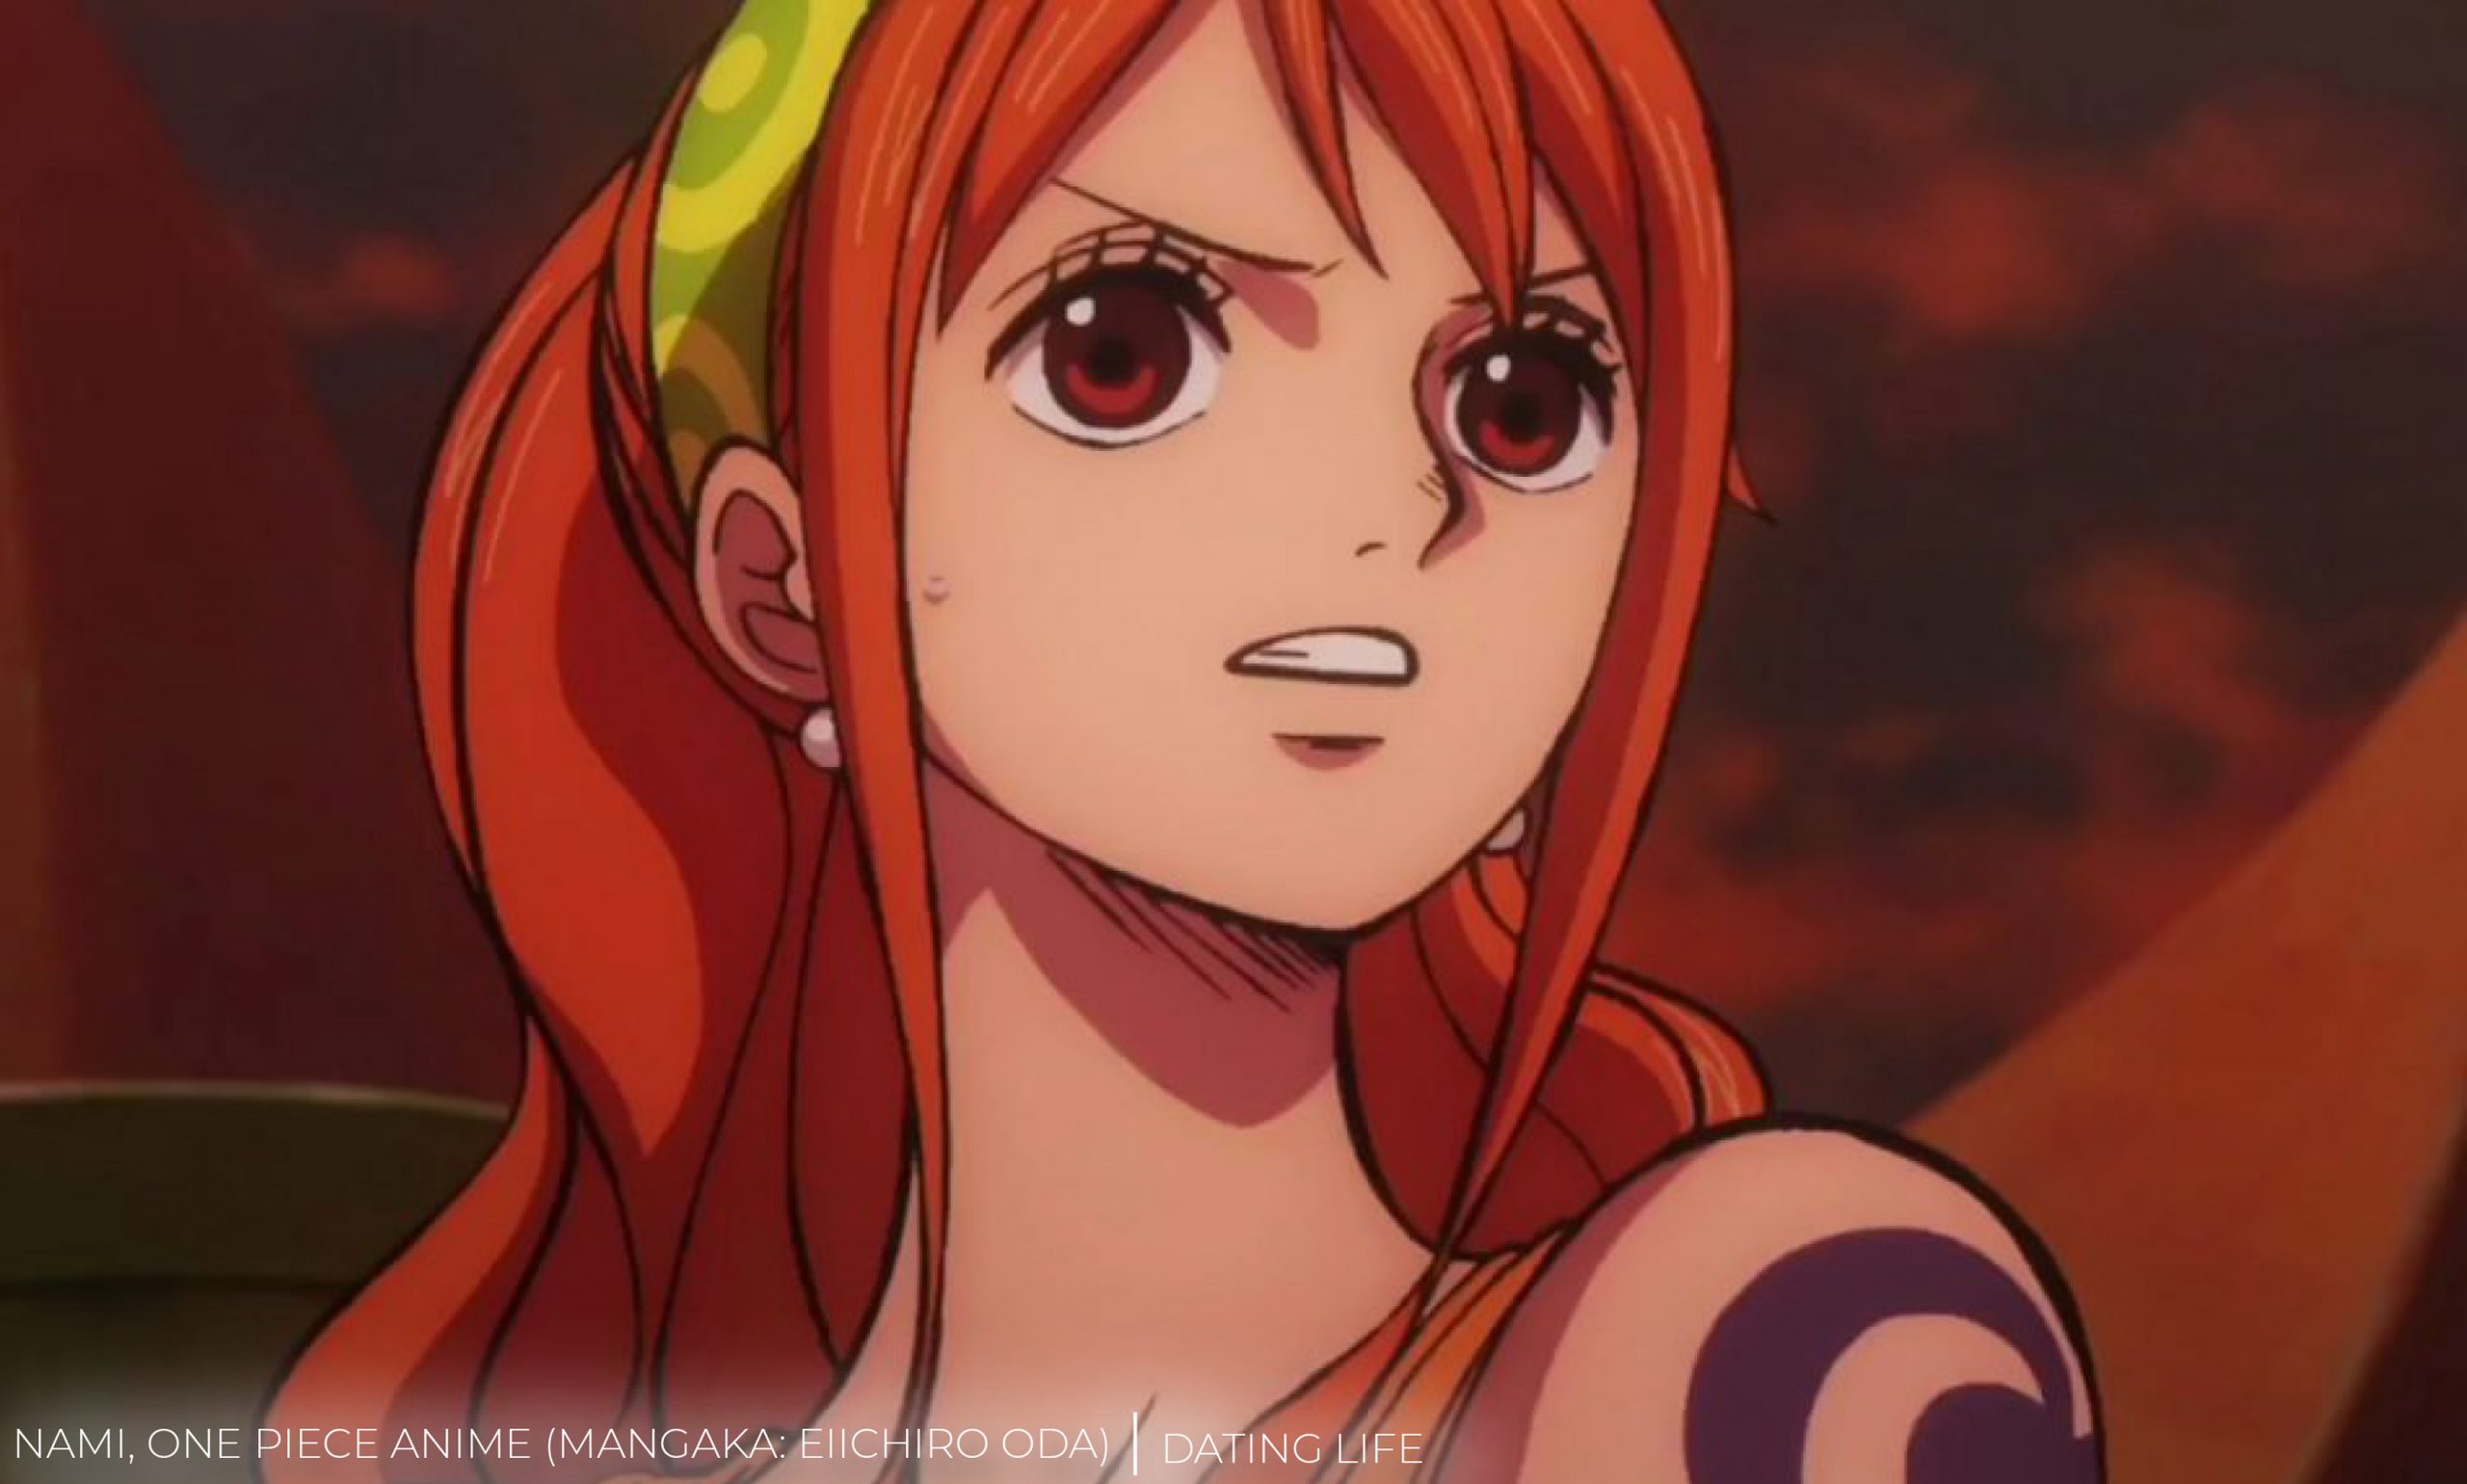 Who Does Nami End up With? The Adorable One Piece Character - OtakuKart